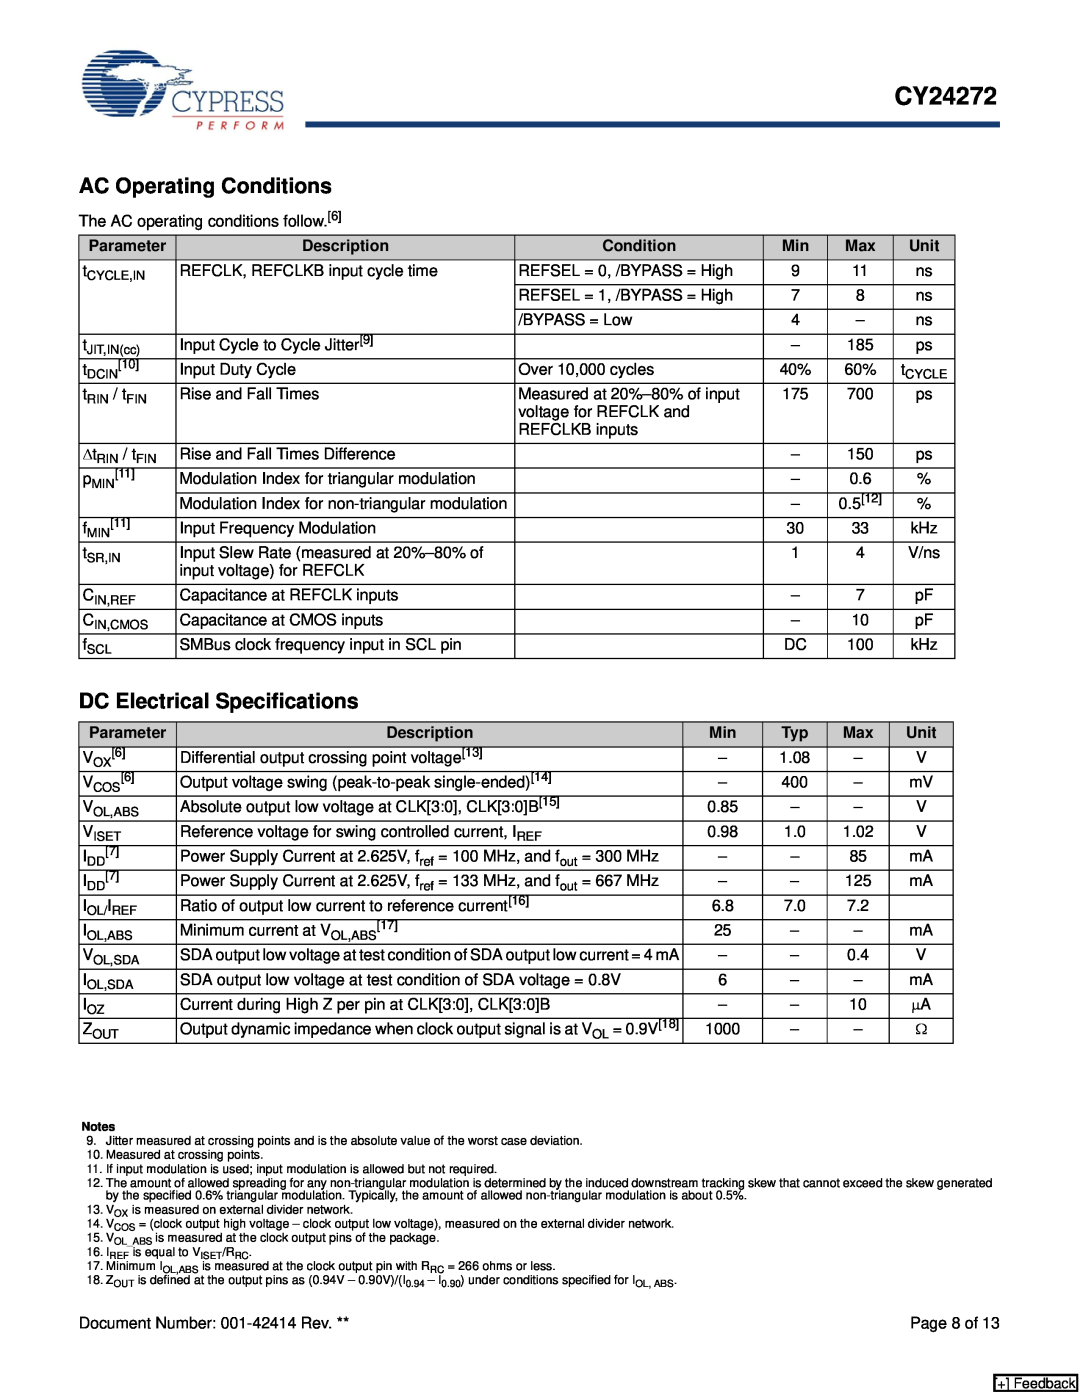 Cypress CY24272, CY24271 manual AC Operating Conditions, DC Electrical Specifications 